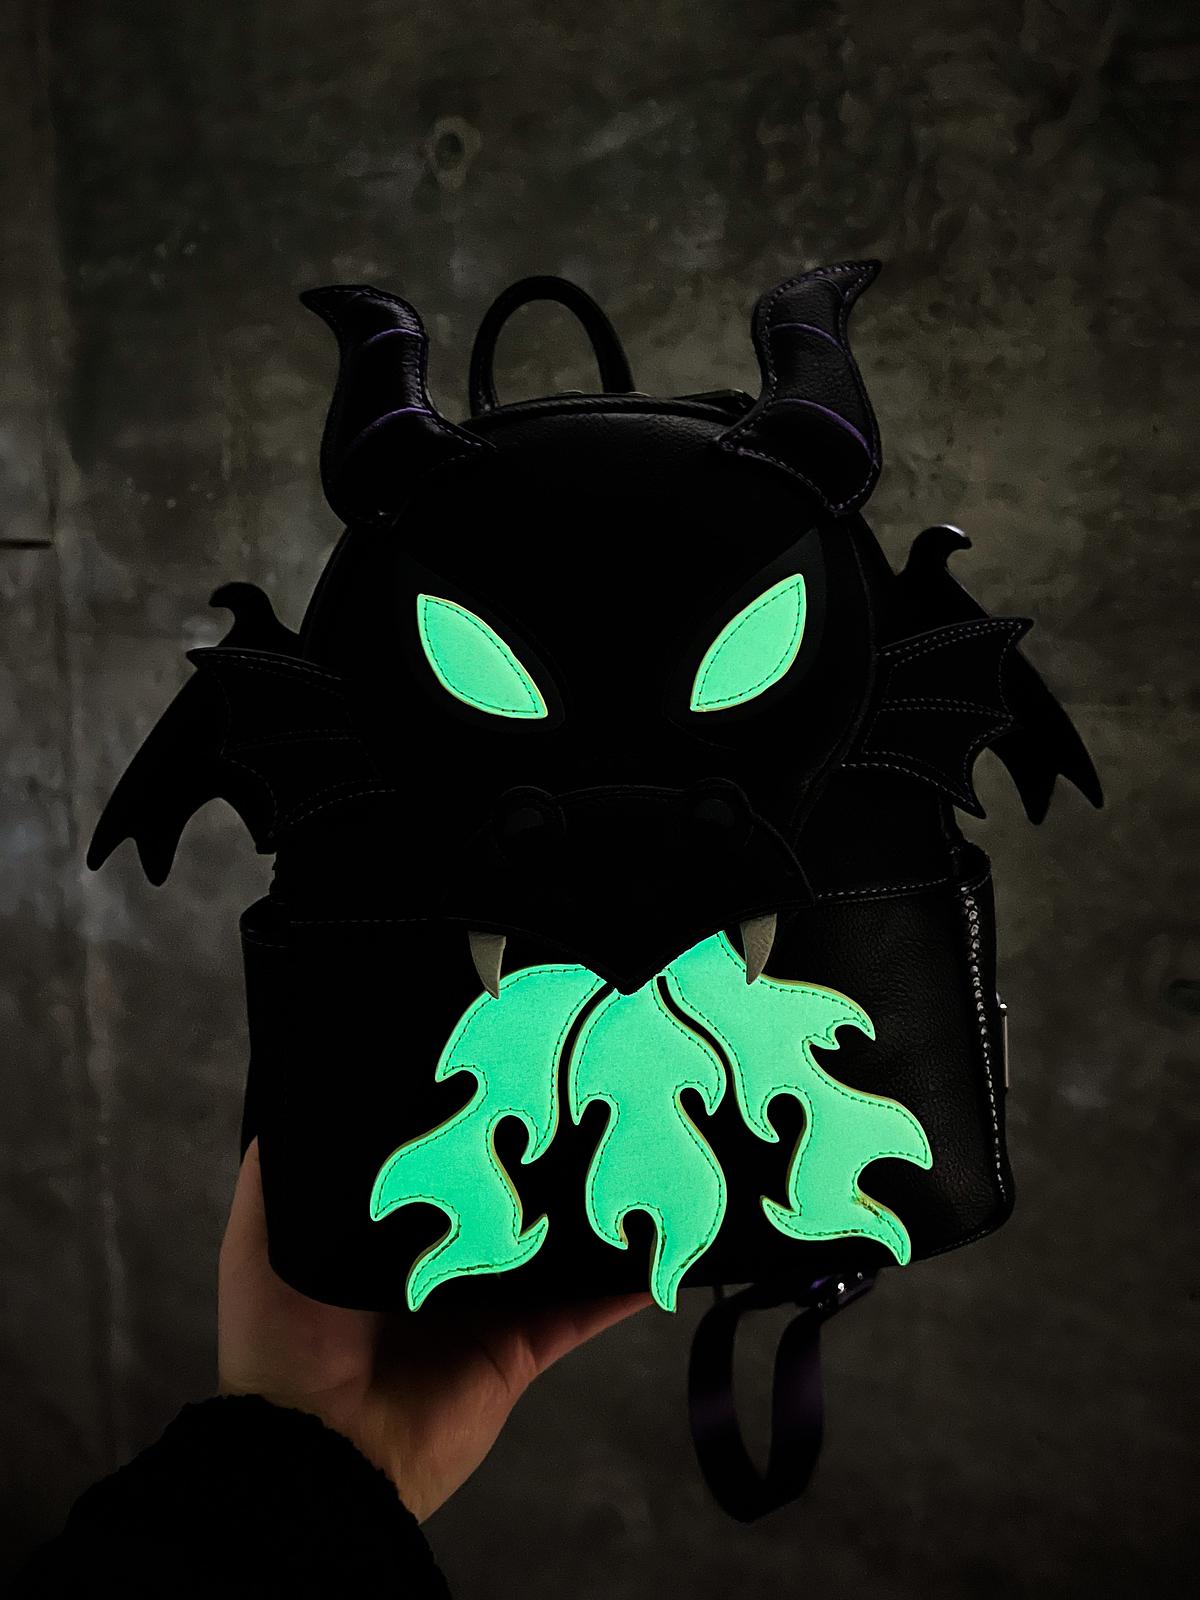 Unboxiny my new Maleficent Dragon Loungefly exclusive from Grotto